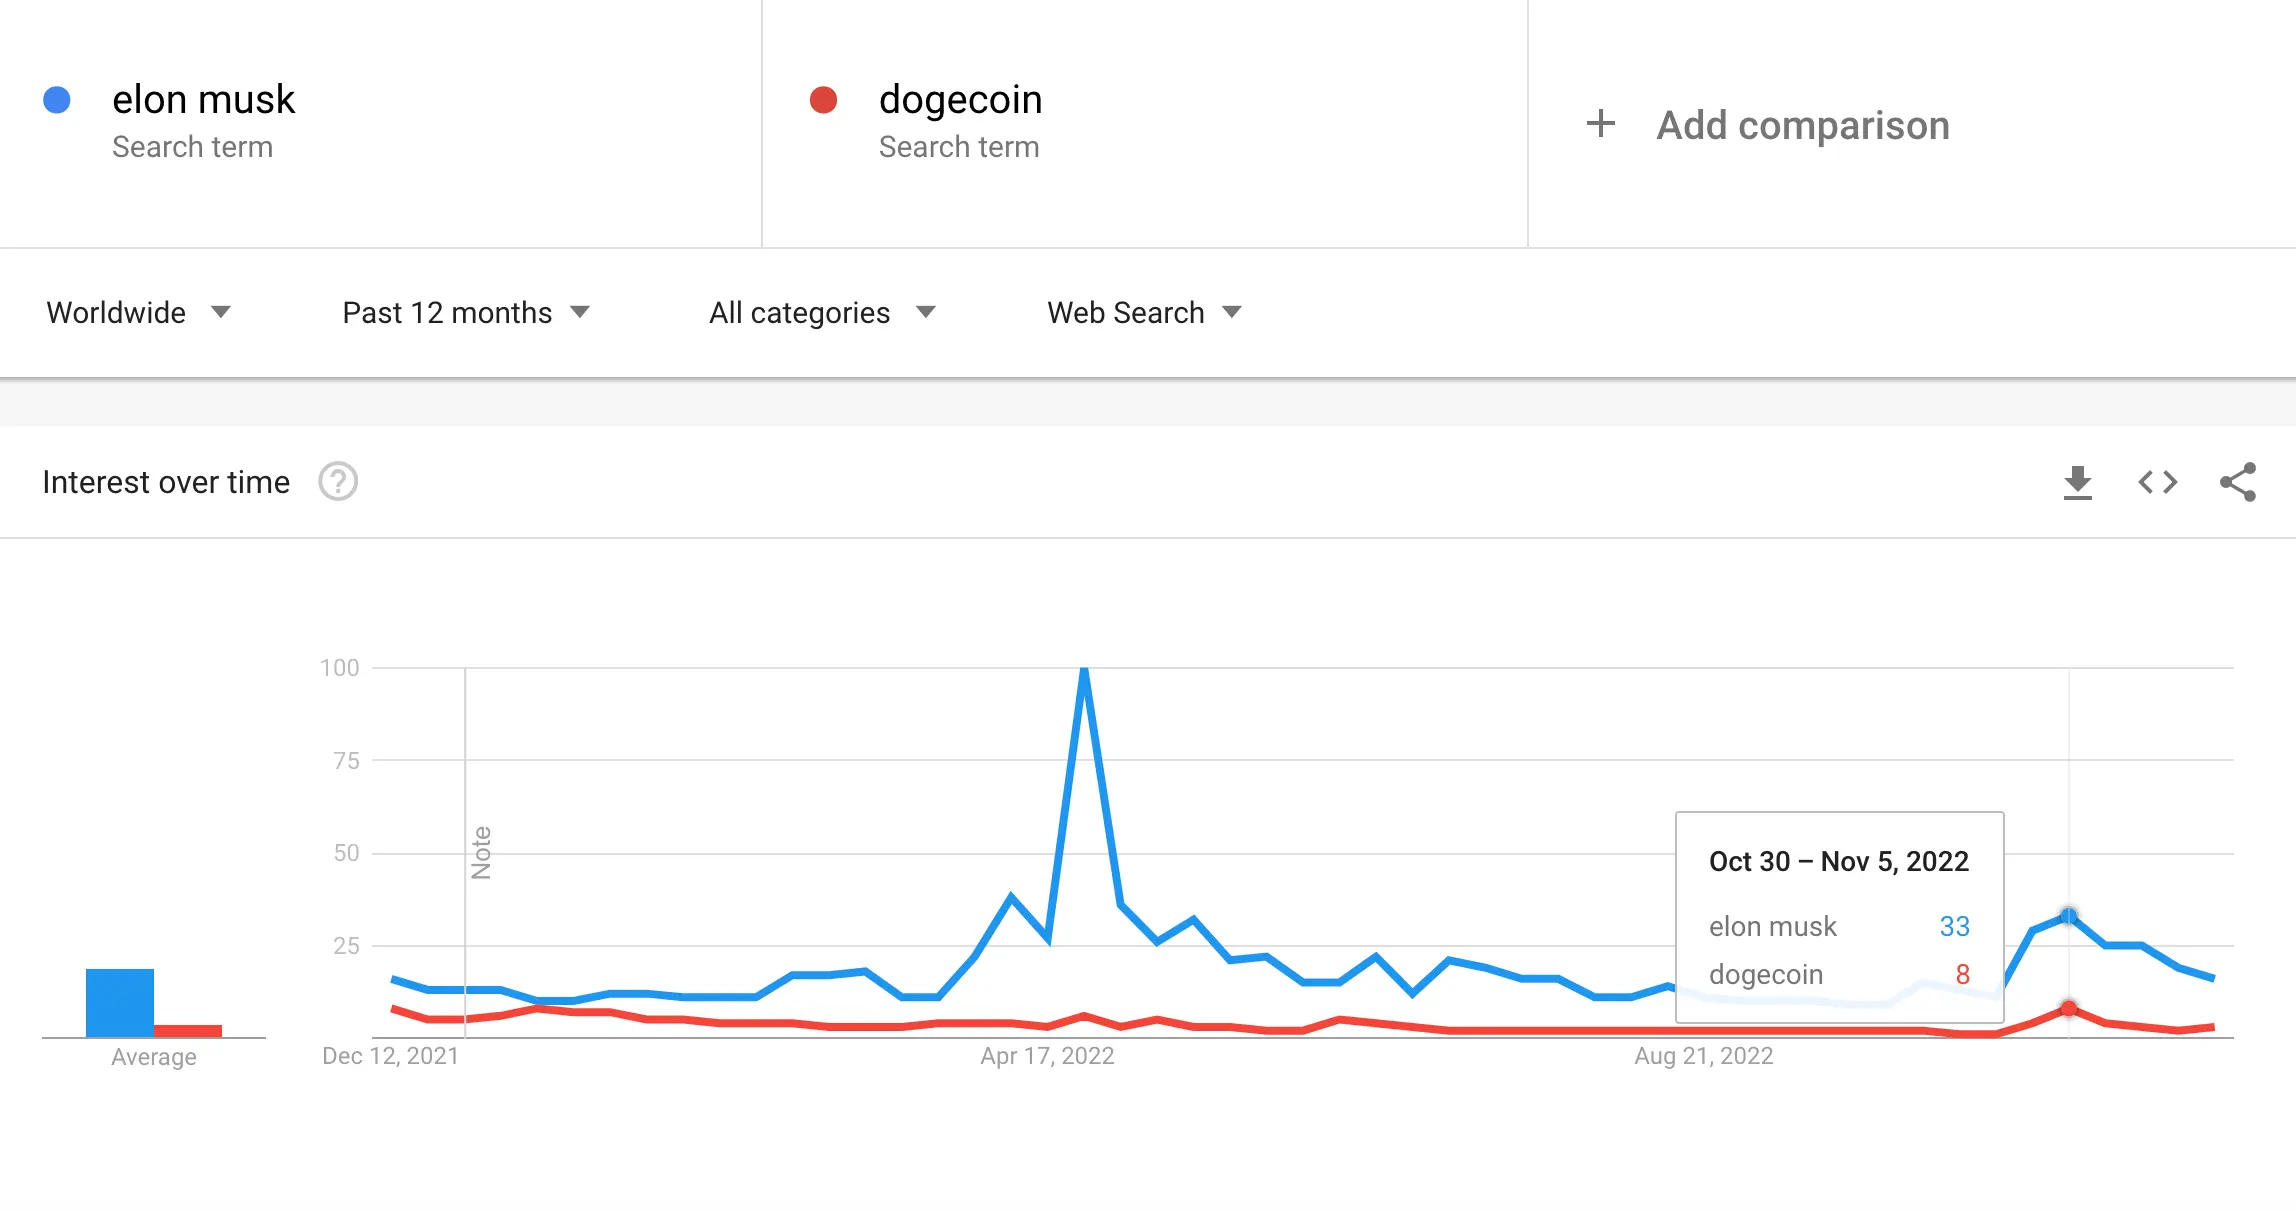 google search trends for elon musk and dogecoin in 2022